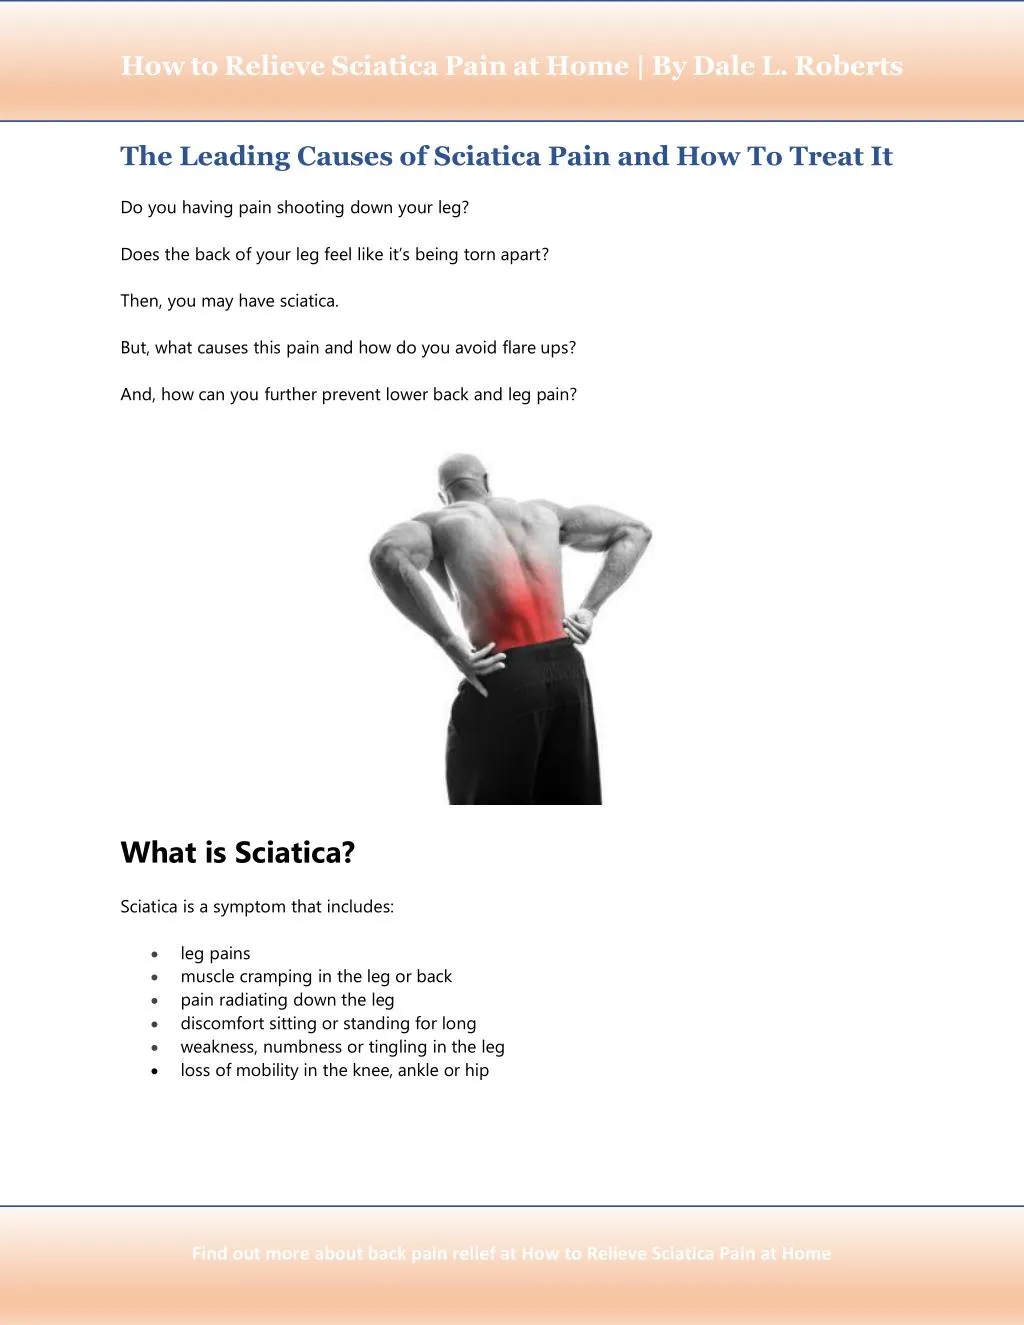 how to relieve sciatica pain at home by dale